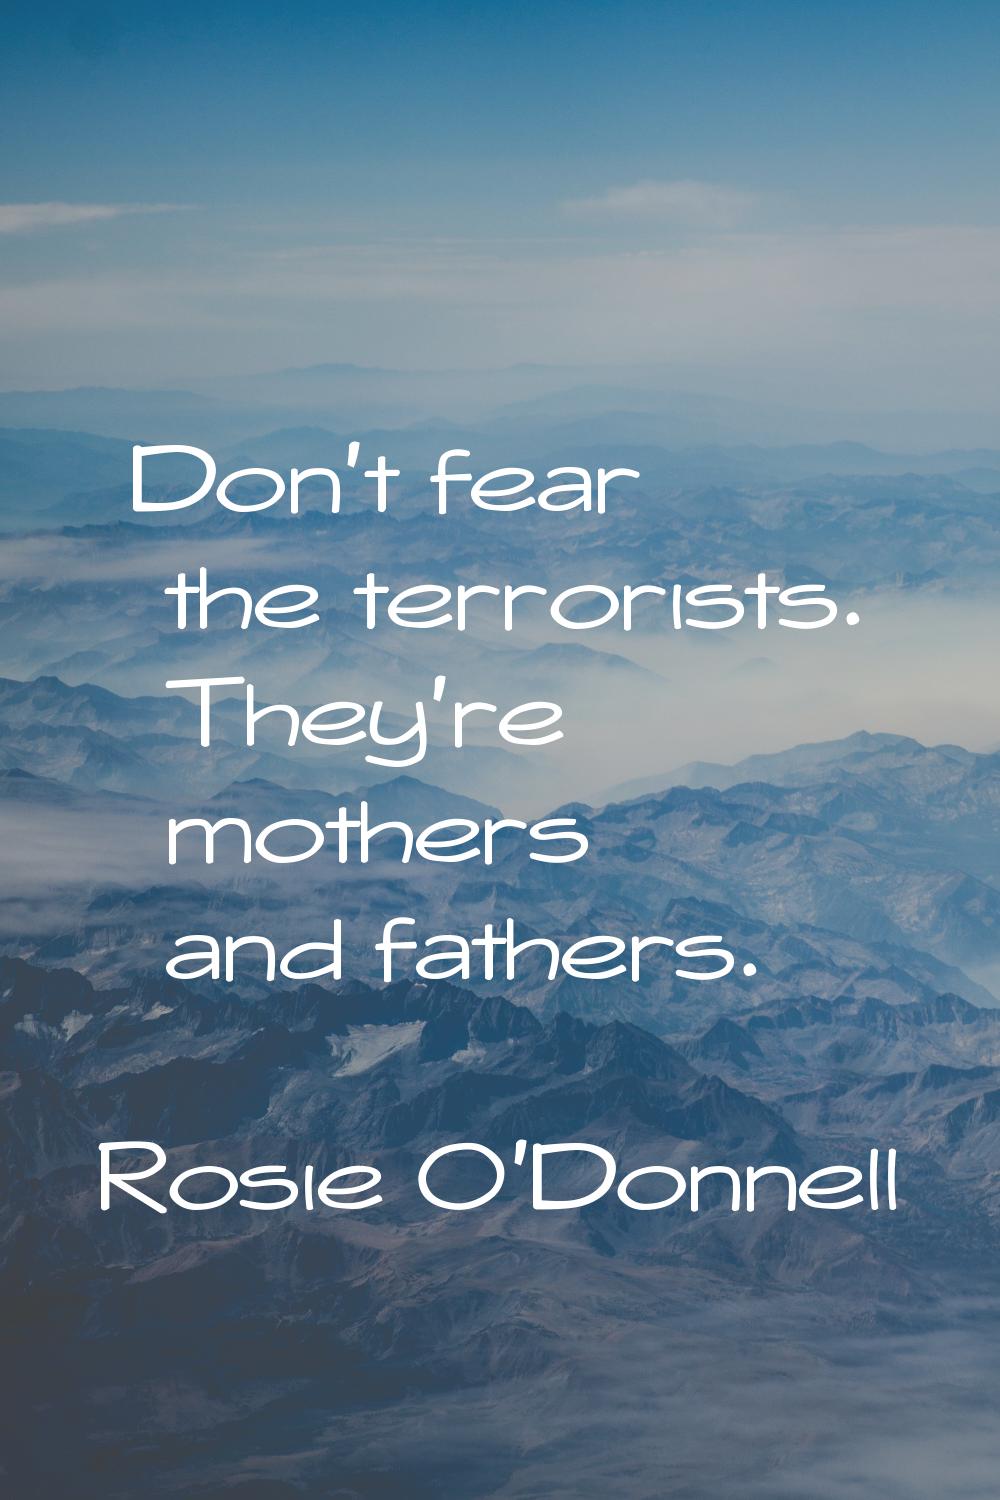 Don't fear the terrorists. They're mothers and fathers.